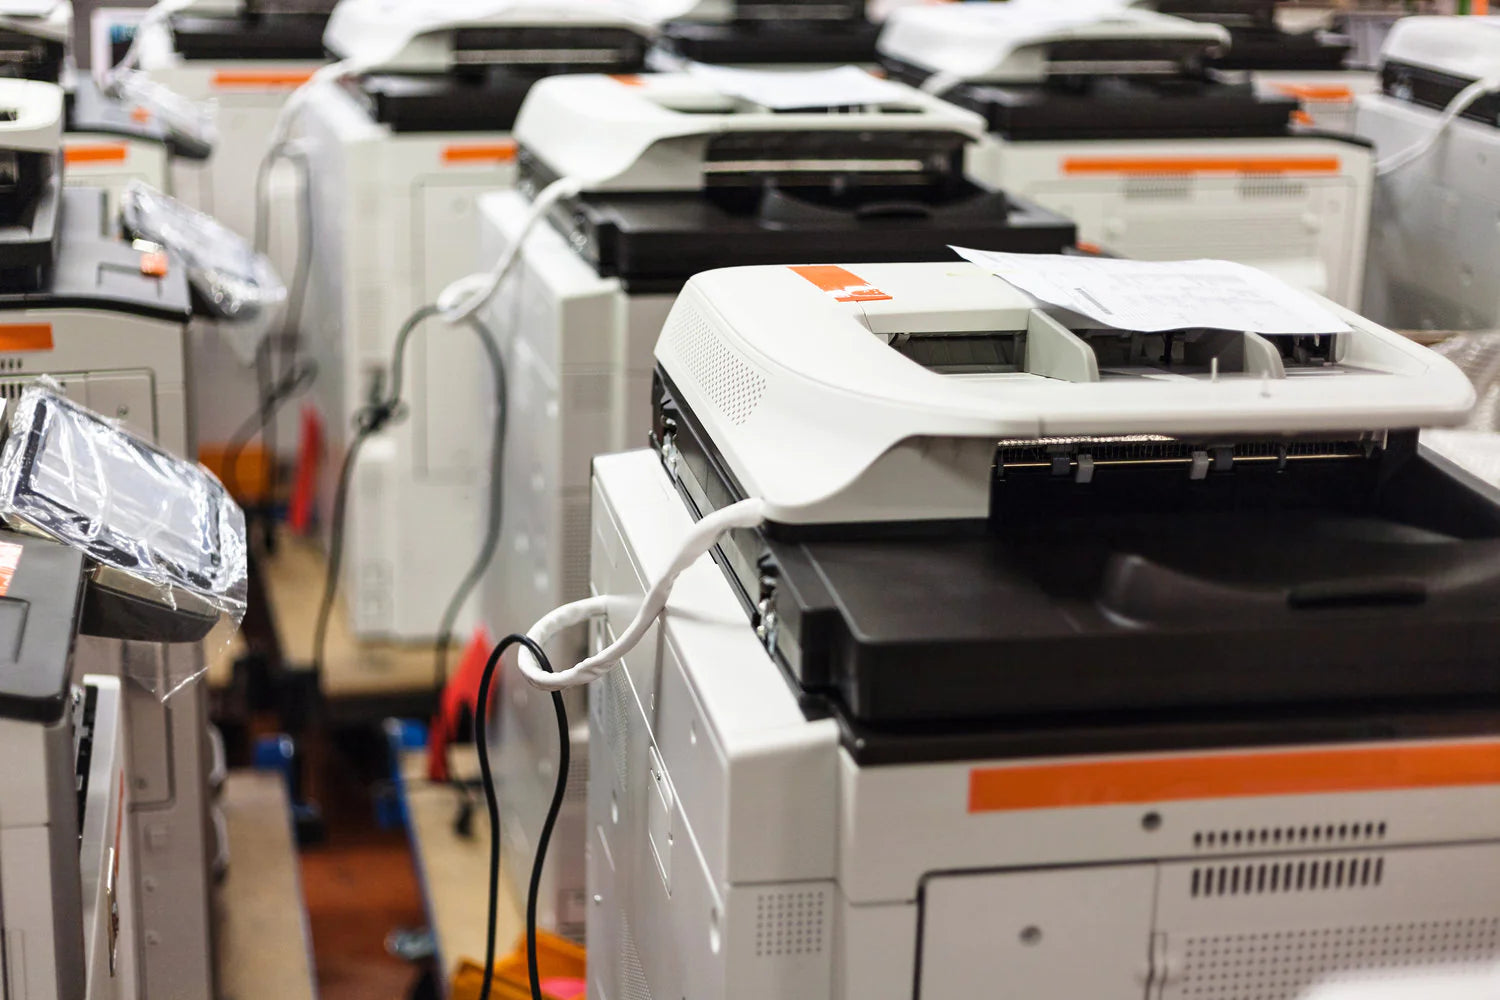 The Ultimate Guide to Leasing Printers for Small Businesses